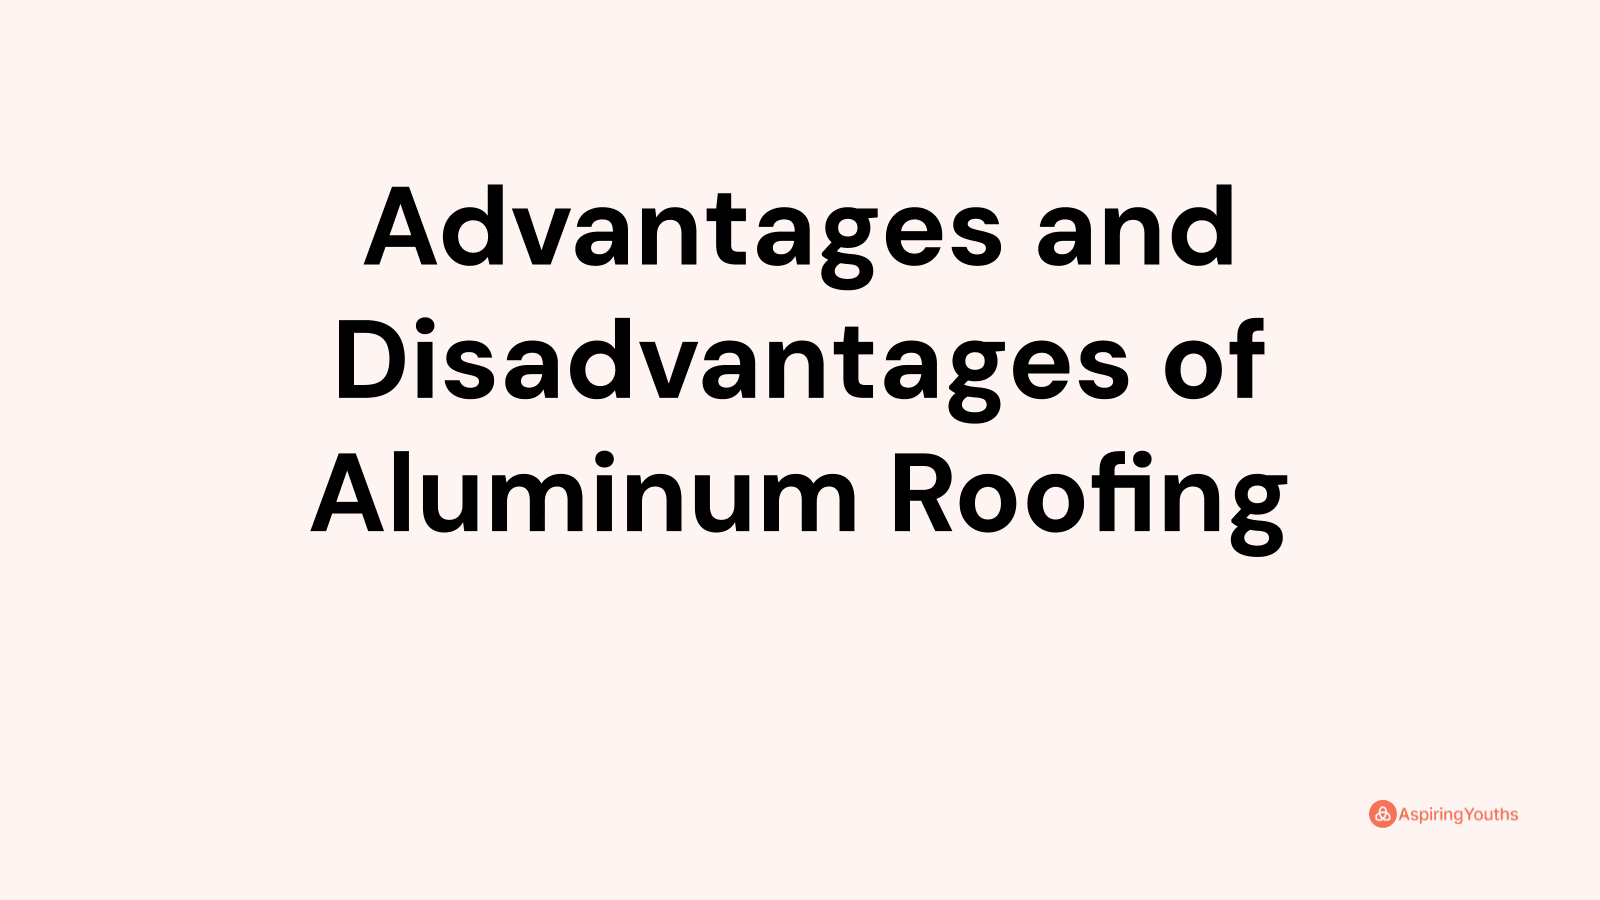 Advantages and disadvantages of Aluminum Roofing